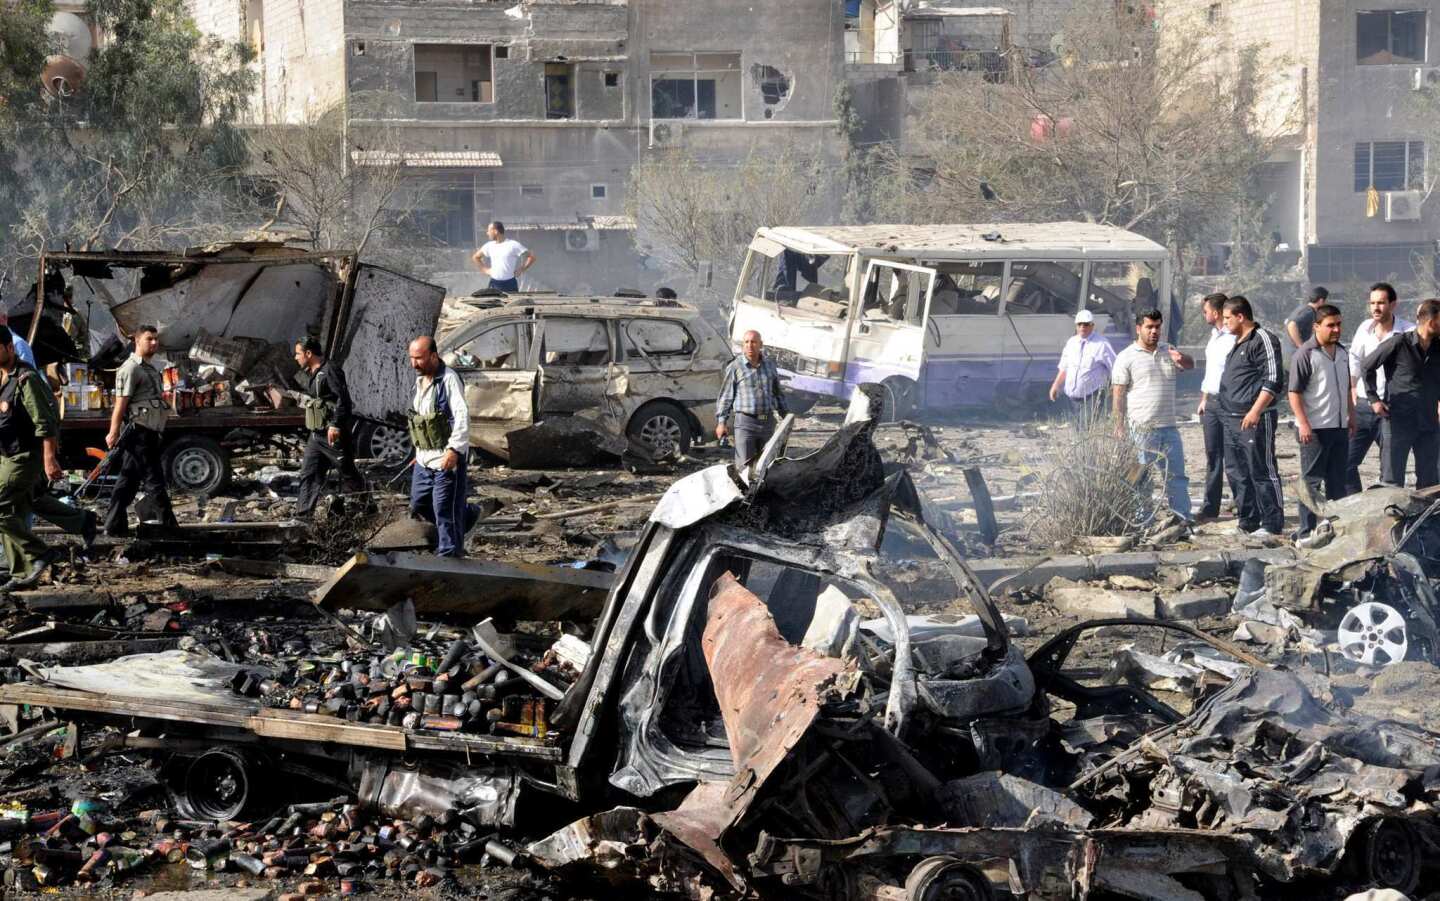 Security forces inspect the site of twin blasts in Damascus. Two powerful blasts struck during morning rush hour, killing scores, wounding dozens and prompting the UN observer chief to appeal for help to end the bloodshed ravaging Syria.